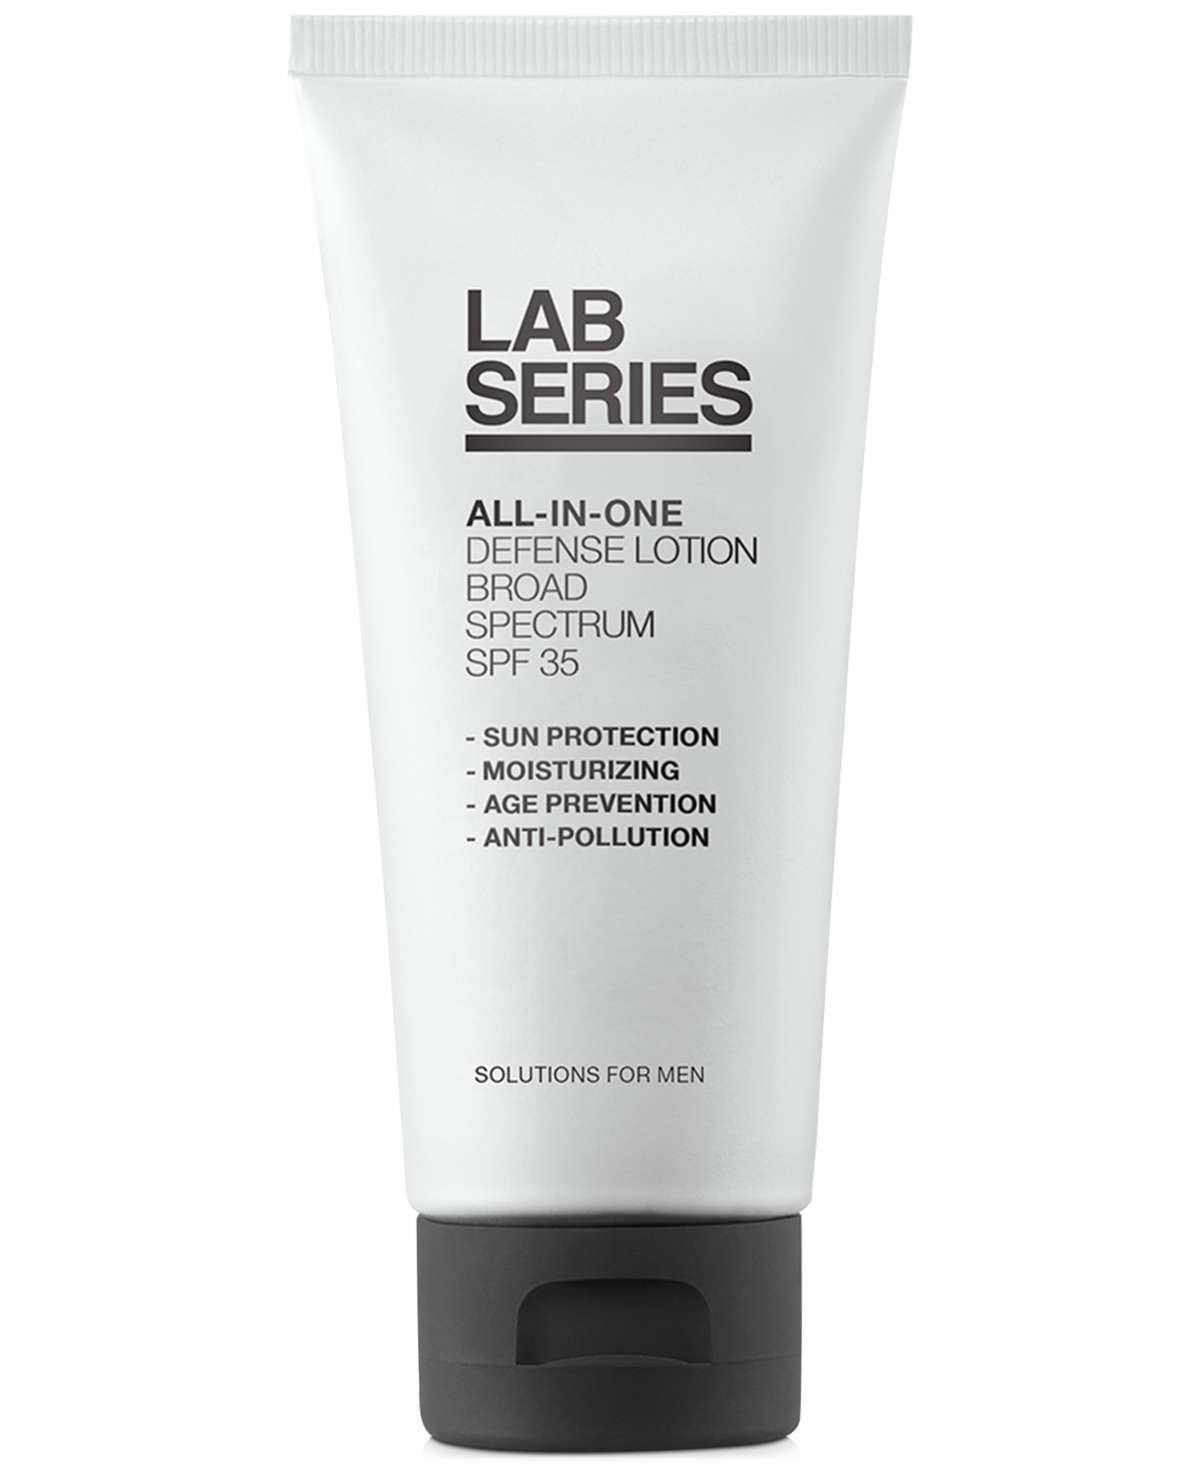 Lab Series All-In-One Defense Lotion Spf 35, 3.4-oz.